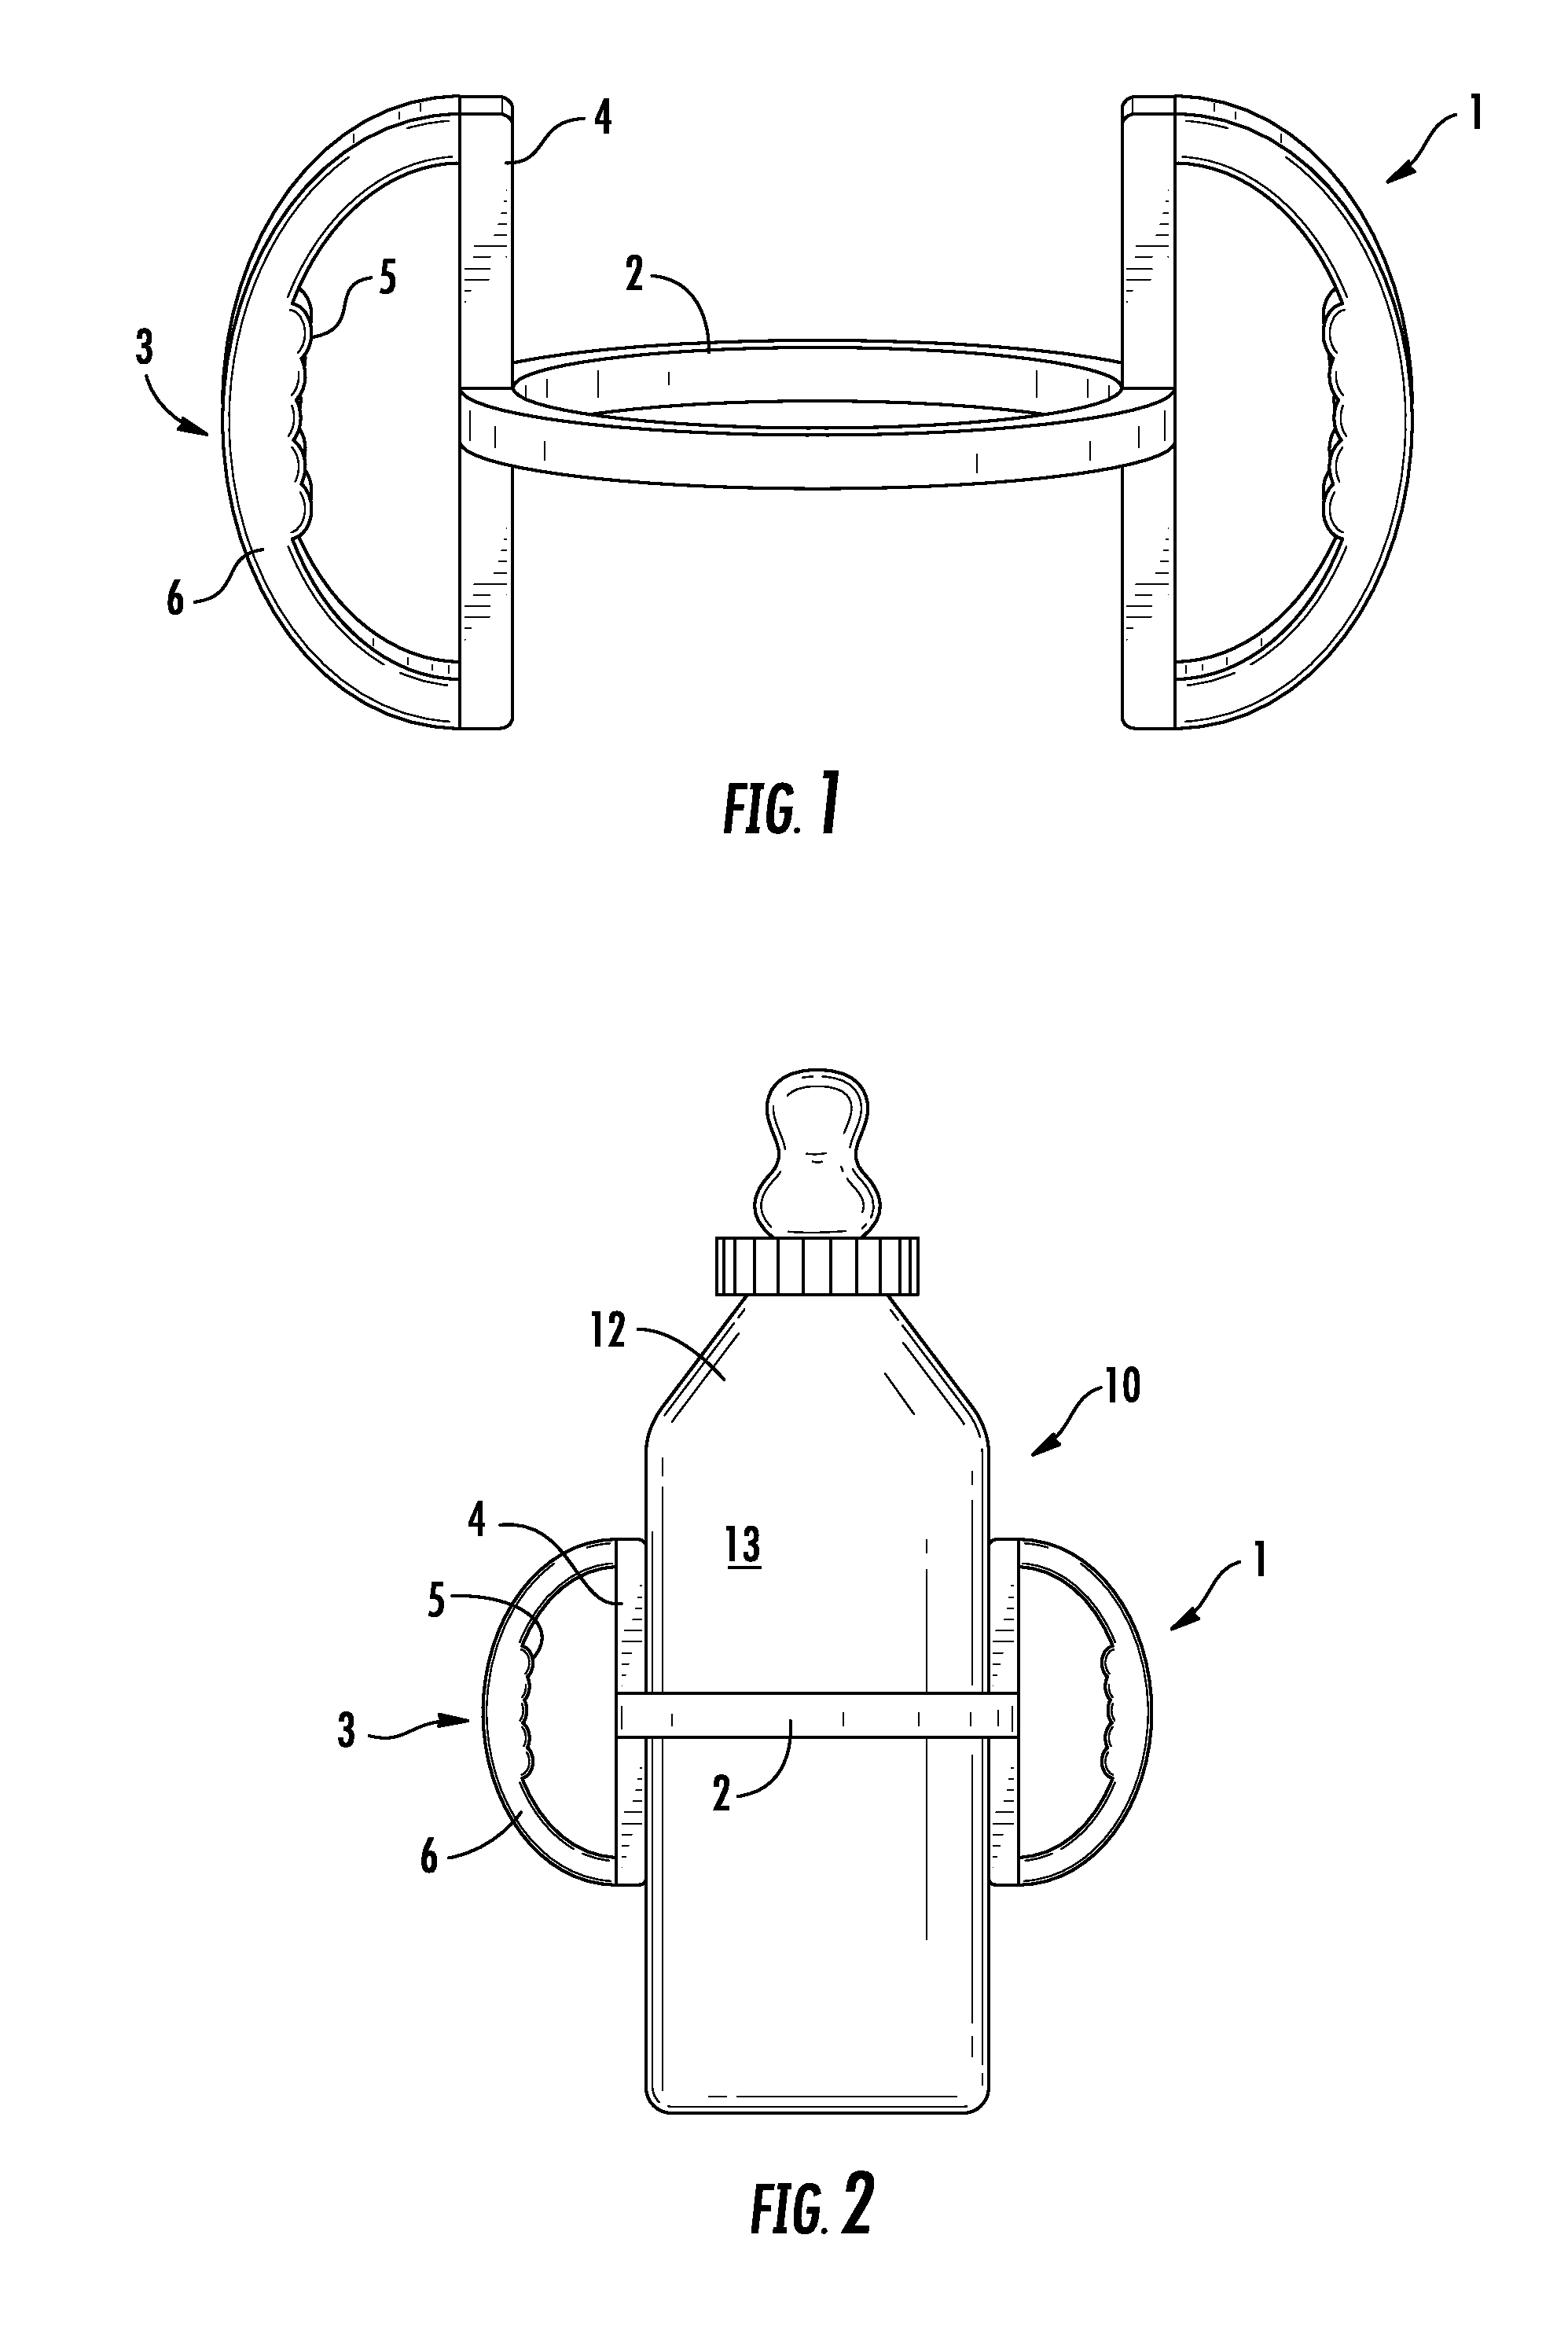 Device for attaching to a baby bottle for holding the bottle